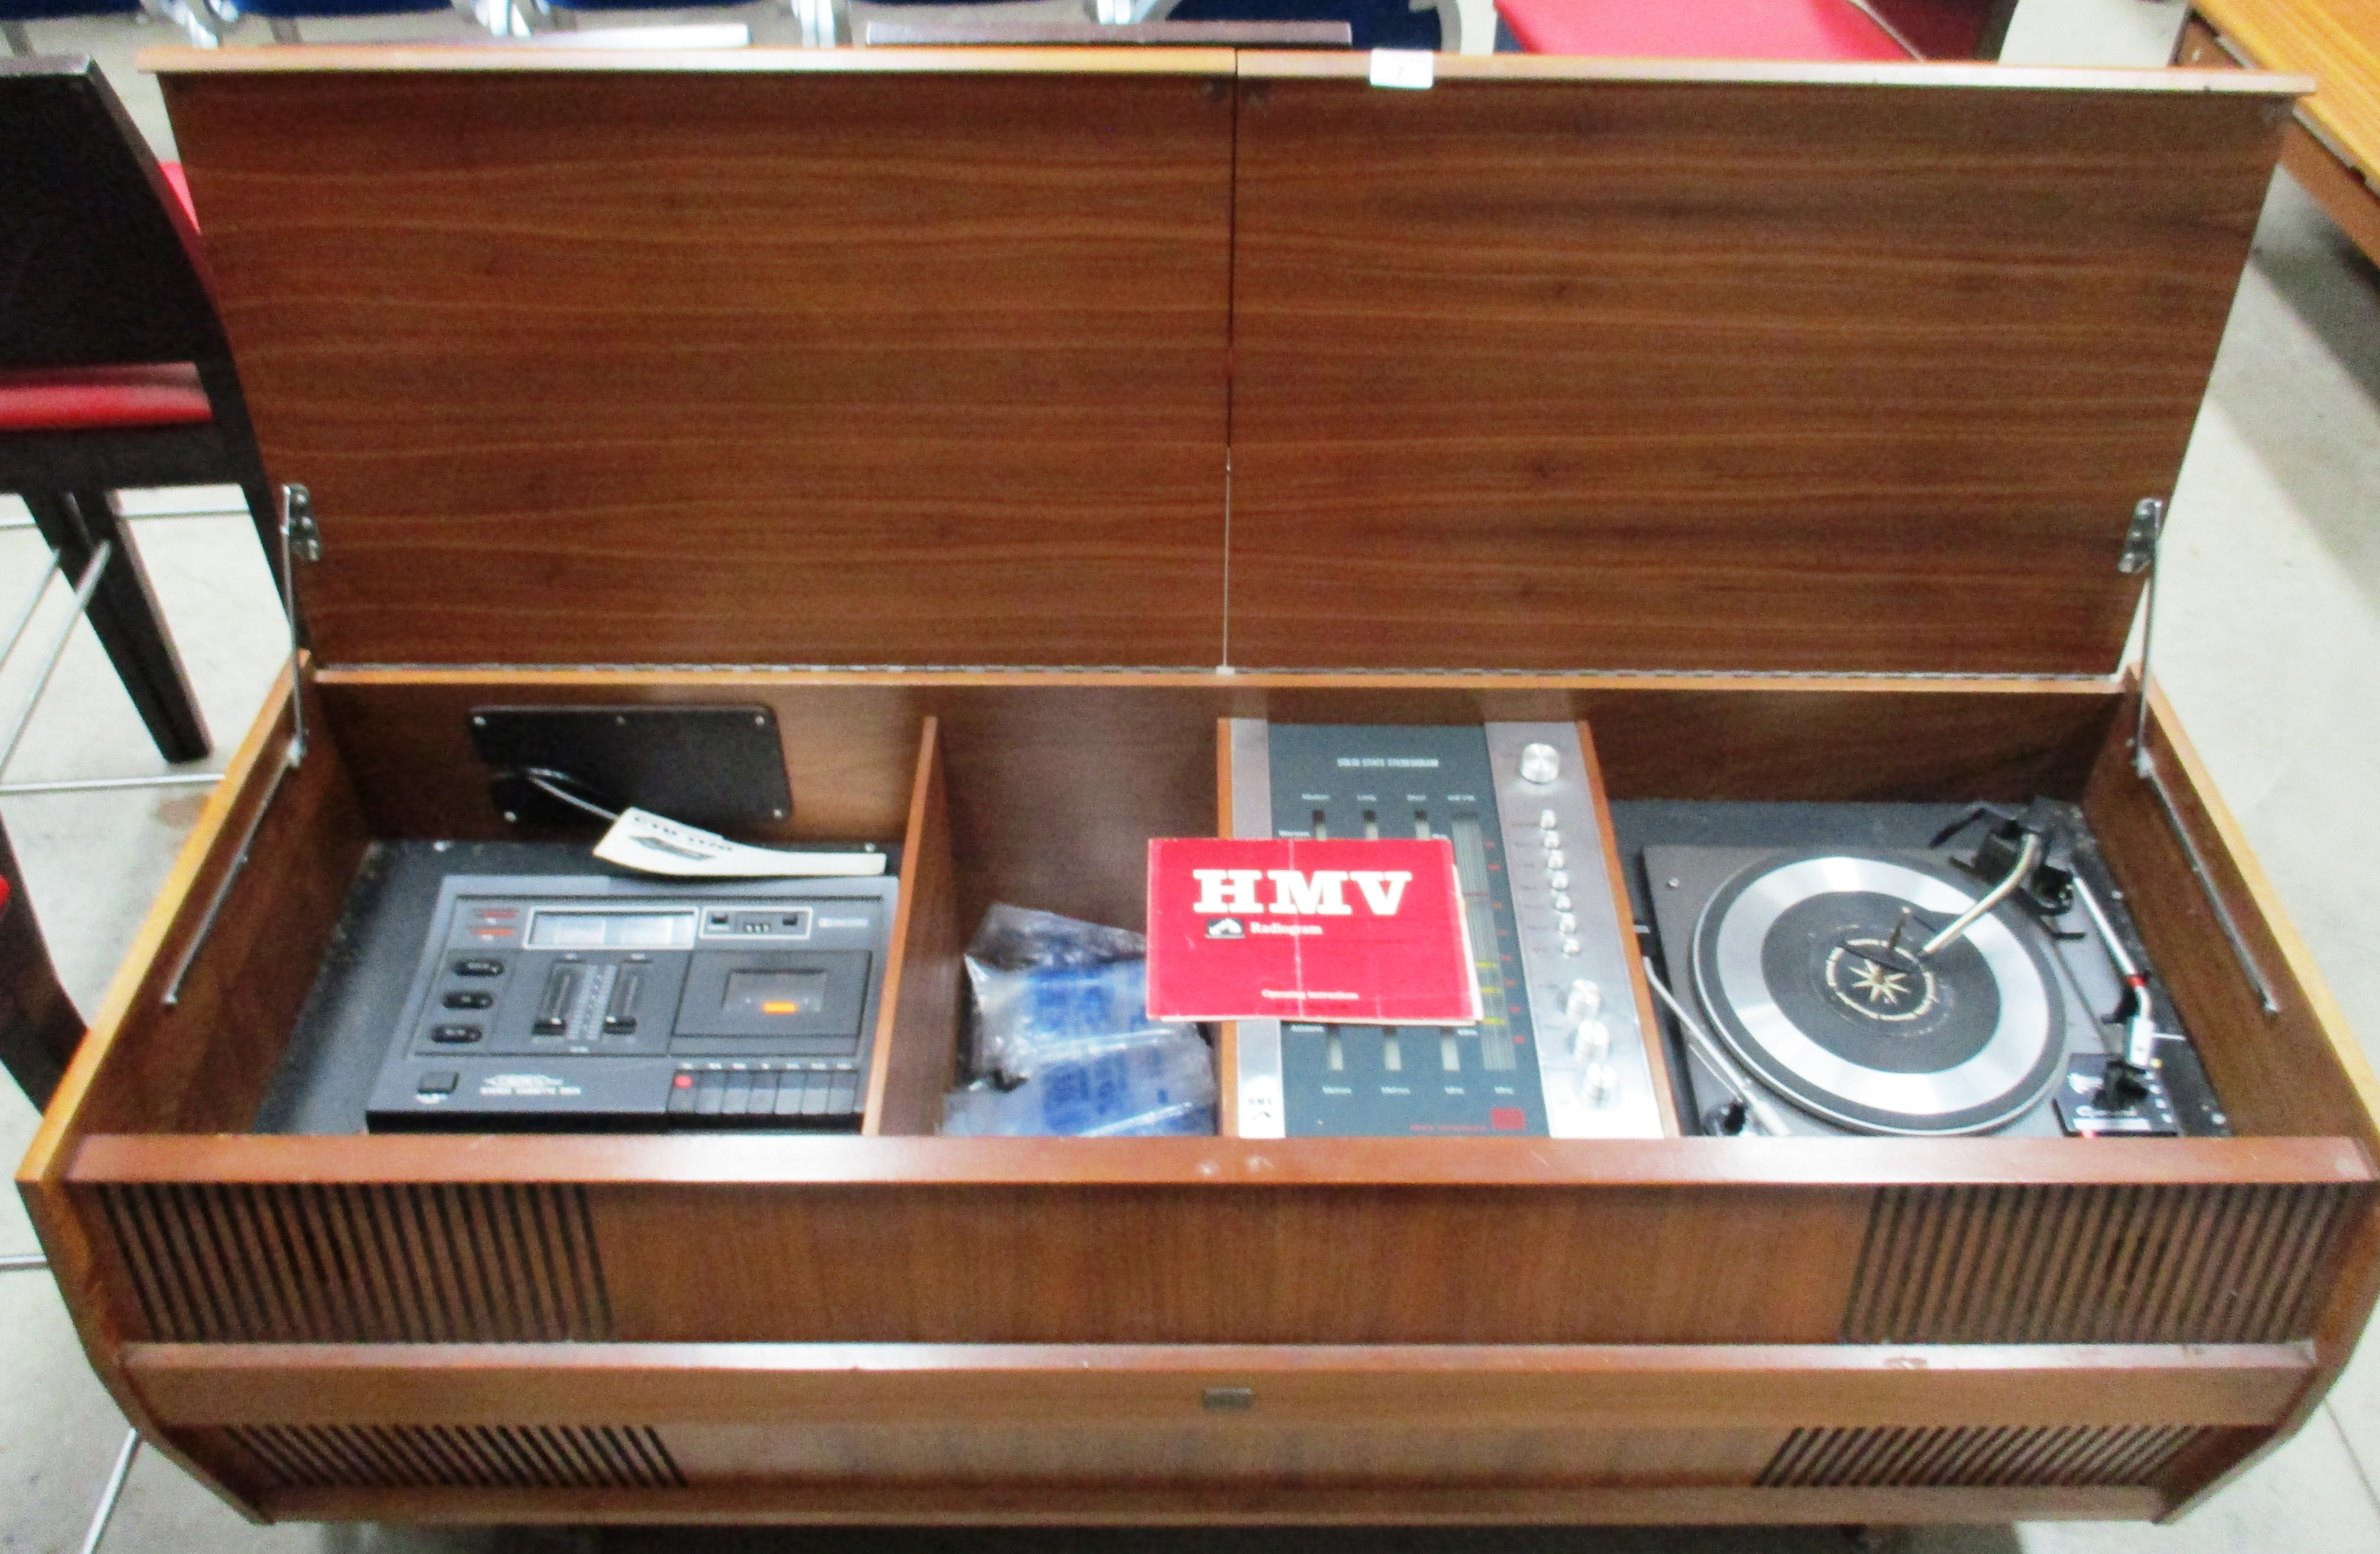 An HMV 2340 radiogram in teak case with Garrard 3000 record deck and a Crown stereo cassette deck